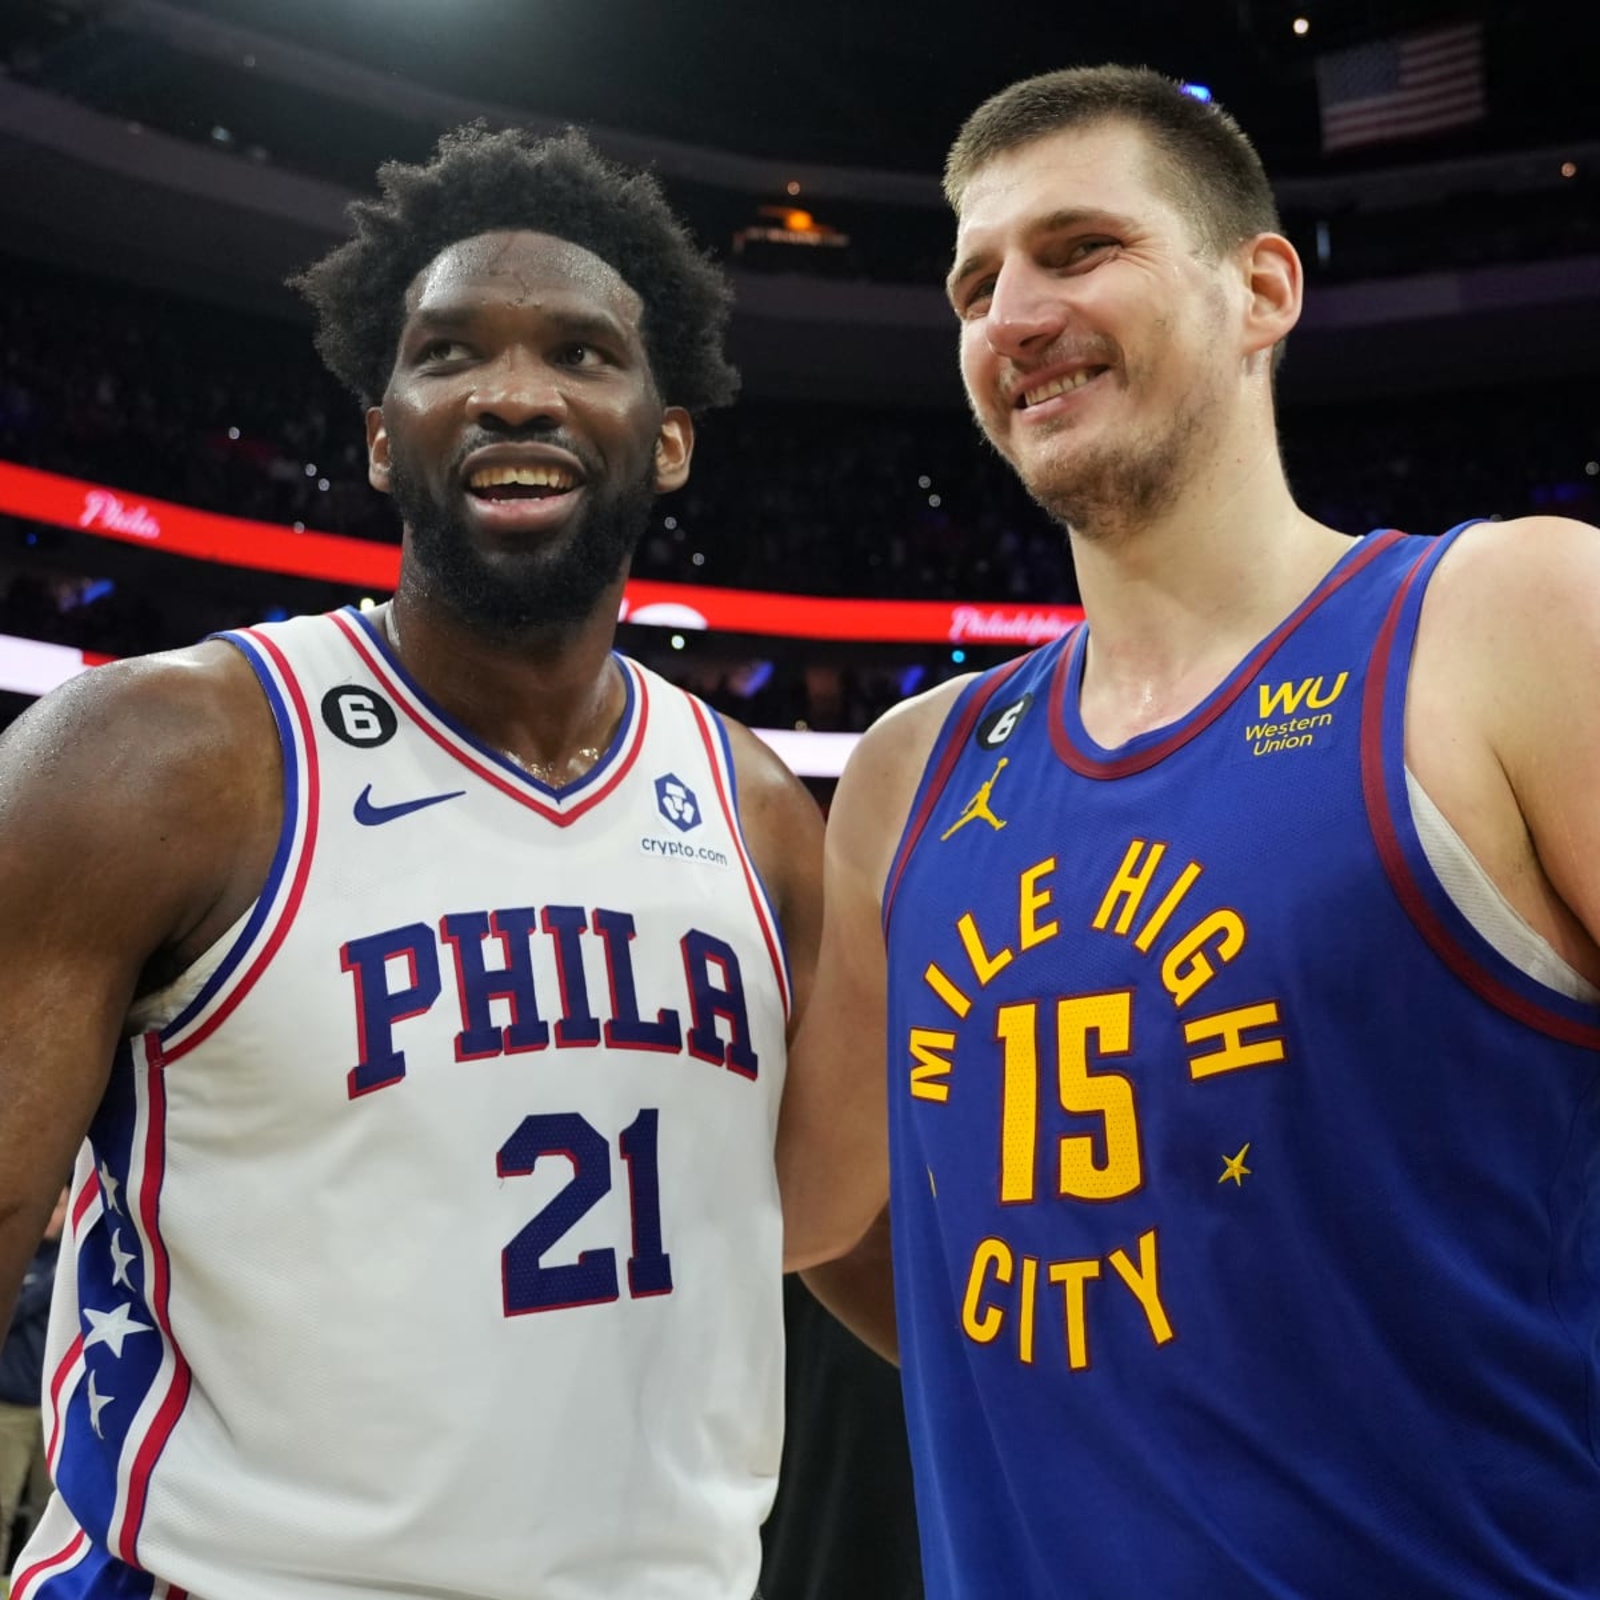 2022/23 NBA All-Star Game: Vote now for the players you want to